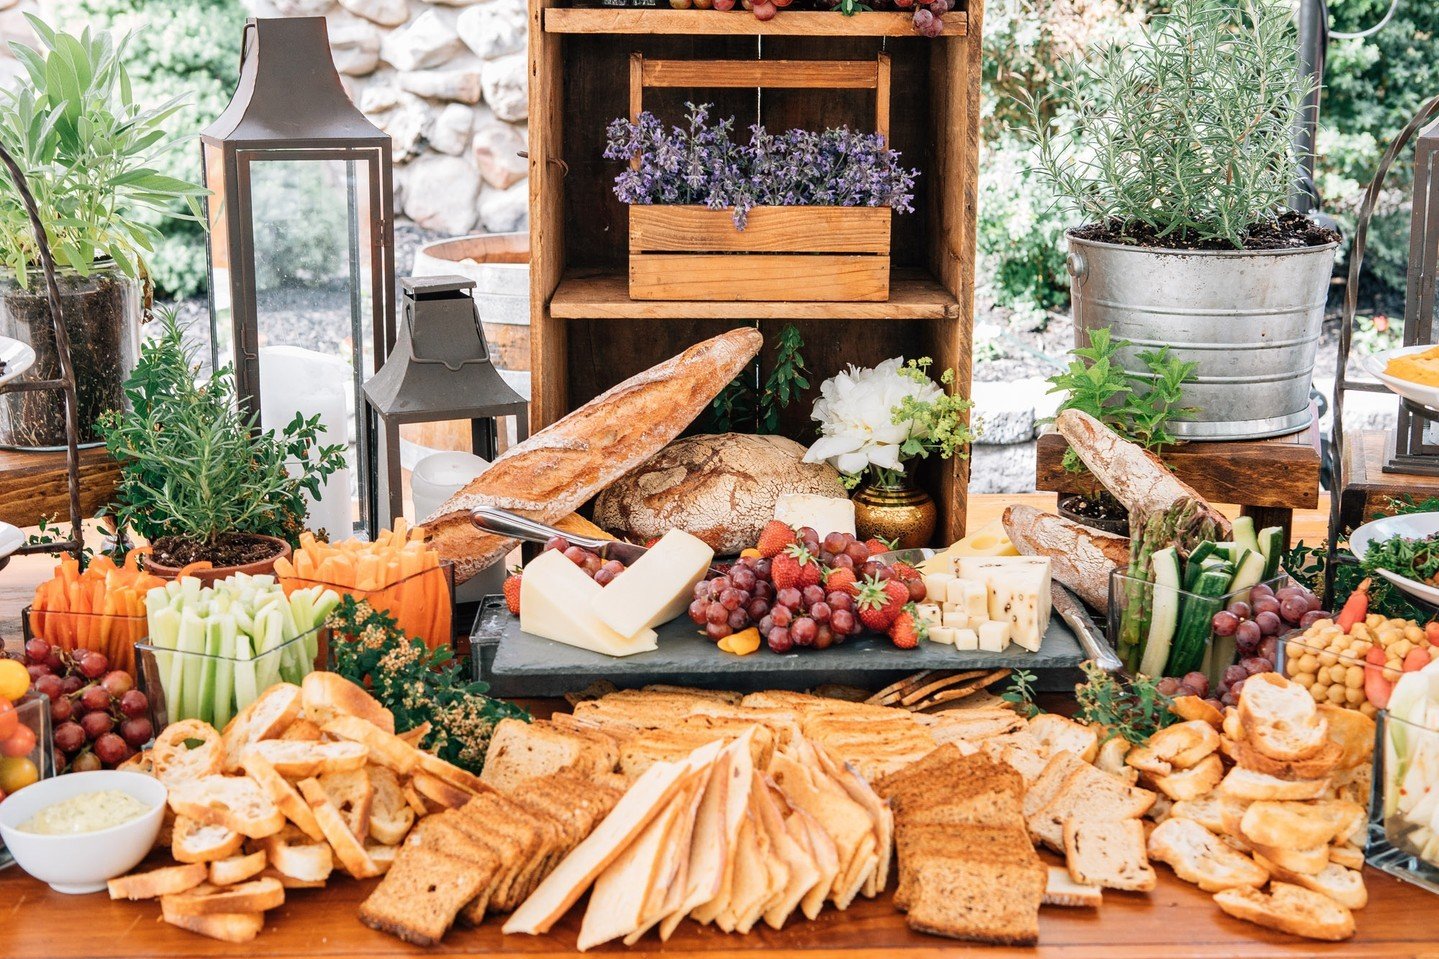 Double Tap 🧡 if you are here for an epic grazing table feature at your event! 

What are some of your favorite board combinations?

*
*